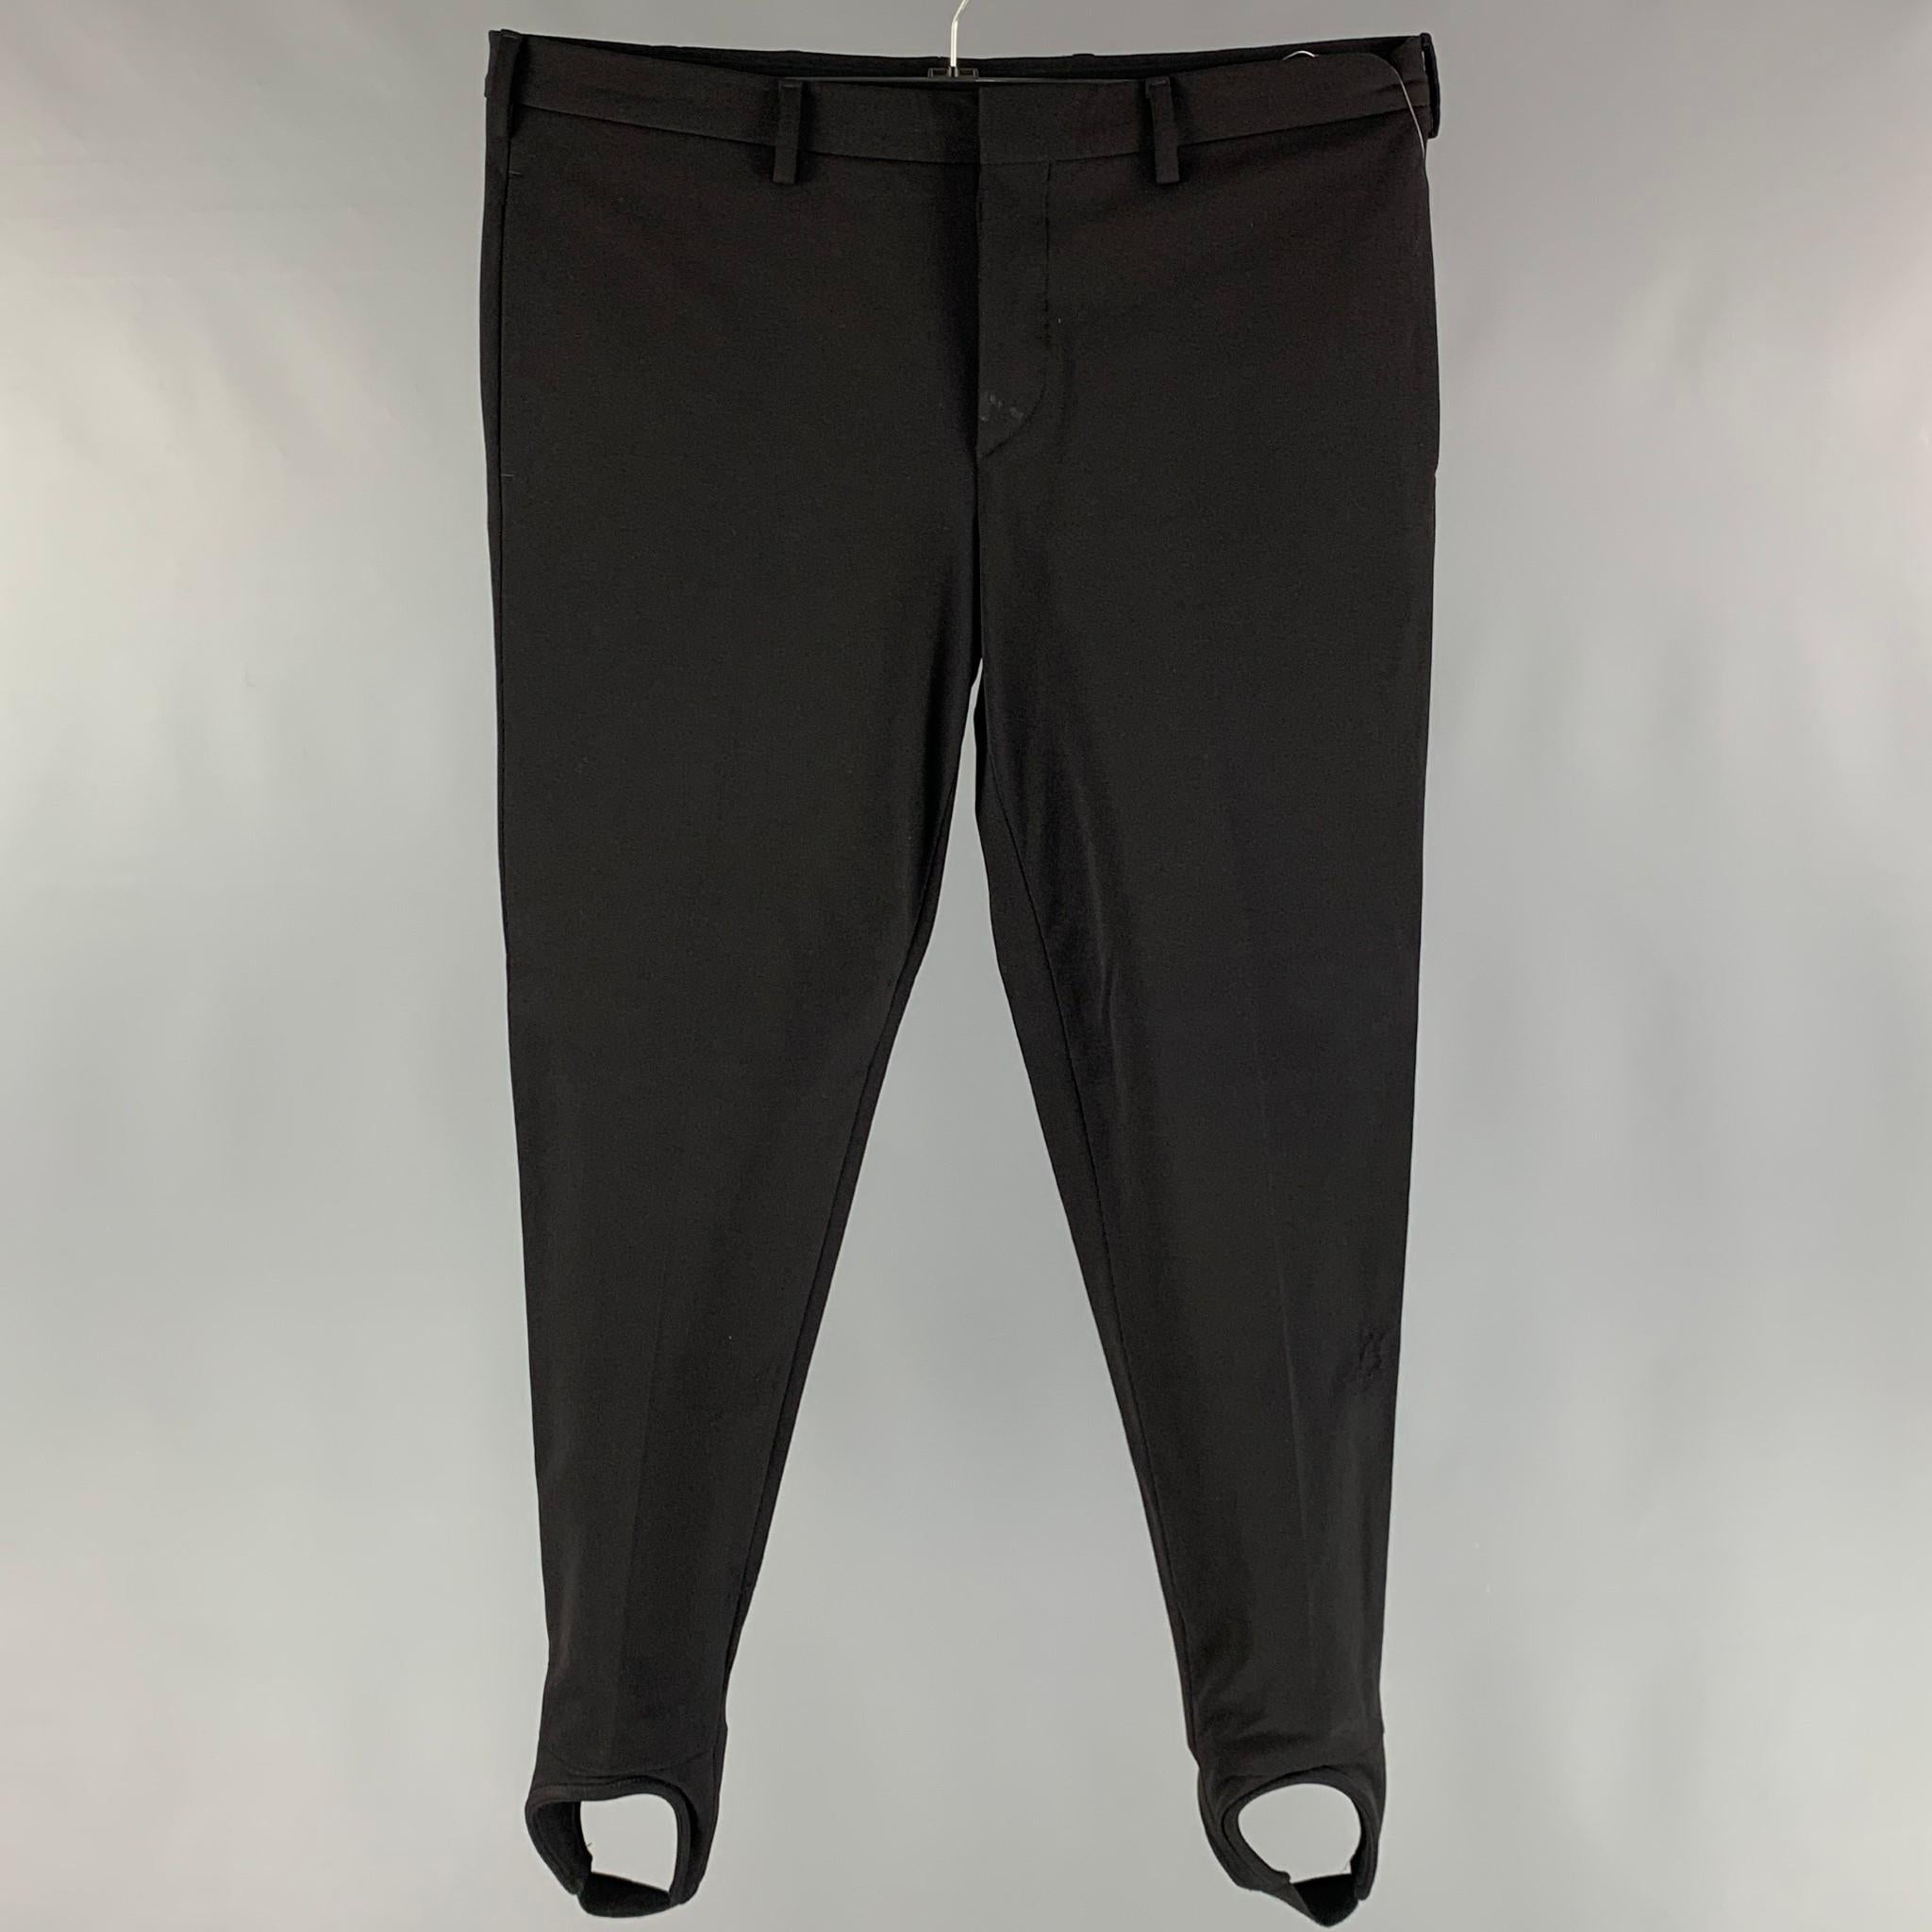 PRADA 2007 dress pants comes in a black nylon blend fleece material featuring a jodhpurs style, flat front, front tab, and a button closure. Made in Italy.

Very Good Pre-Owned Condition. As- Is.
Marked: 52

Measurements:

Waist: 37 in.
Rise: 9.5